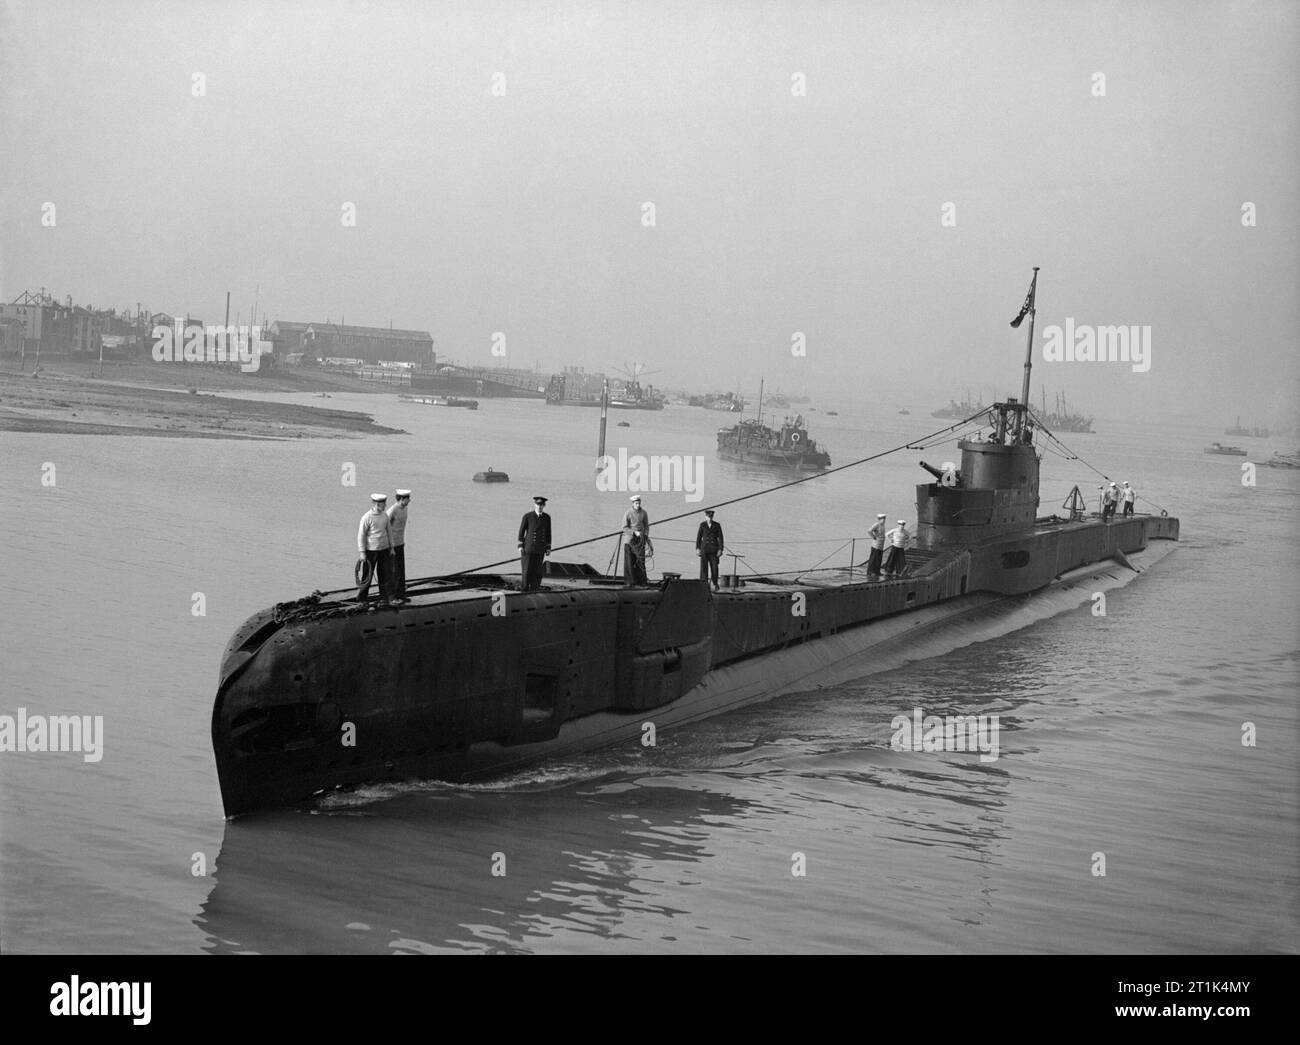 HM Submarine TAKU returns home after a year's successful service in the Mediterranean, 3 August 1943. HMSM TAKU returns home after a year's successful service in the Mediterranean under the command of Lt A J Pitt RN. Earlier in the war, after torpedoing a large supply ship off the Norwegian Coast, TAKU was forced to lie for four hours on the sea bed while the enemy rained down 'a perfect avalanche of depth charges'. Following the sinking of a medium supply ship in the Aaegean Sea, she had to remain submerged for 36 hours because the captain could not risk the noise of the blowers to clear the Stock Photo